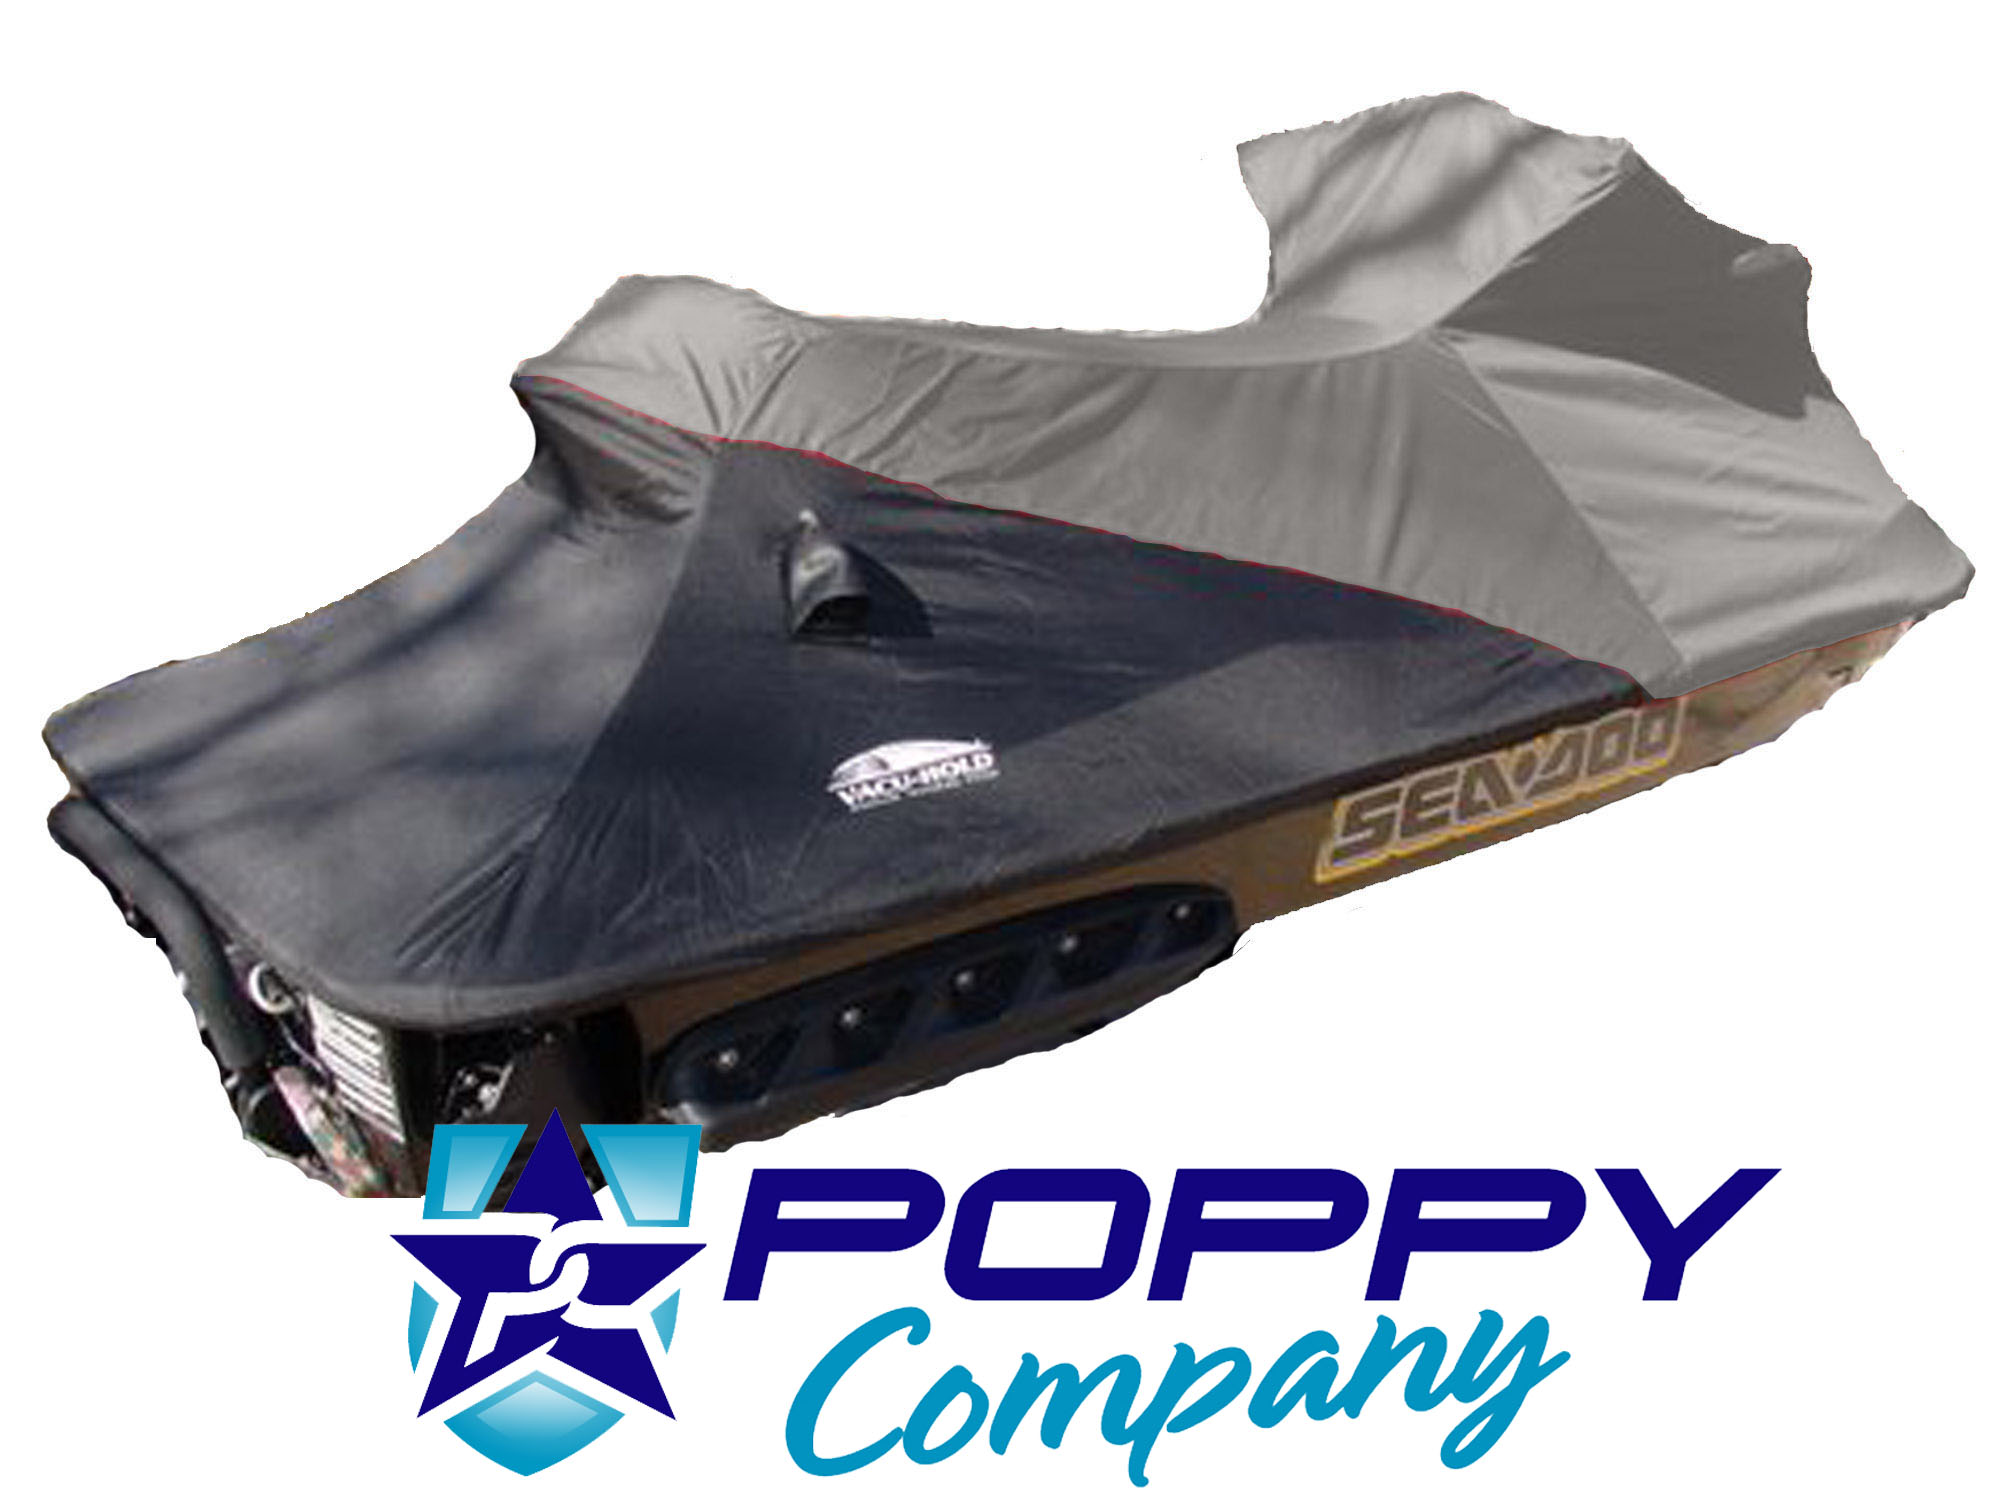 New 19962002 Seadoo GTX Cover, 19972000 SeaDoo GTI PWC Boat Cover Fitted eBay